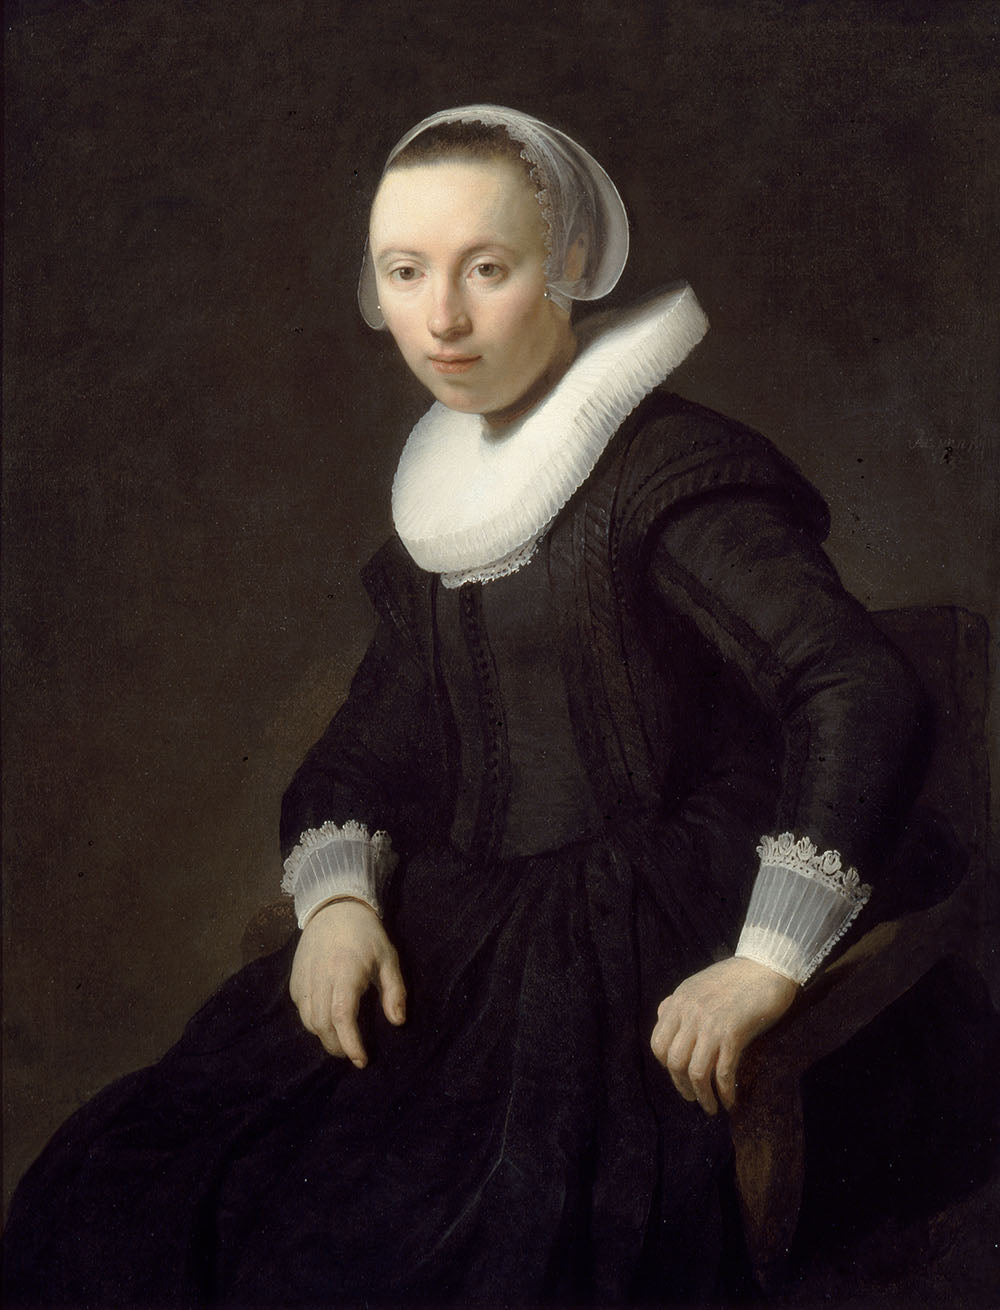 Portrait of a Woman Seated Painting by Rembrandt Oil on Canvas Reproduction by Blue Surf Art